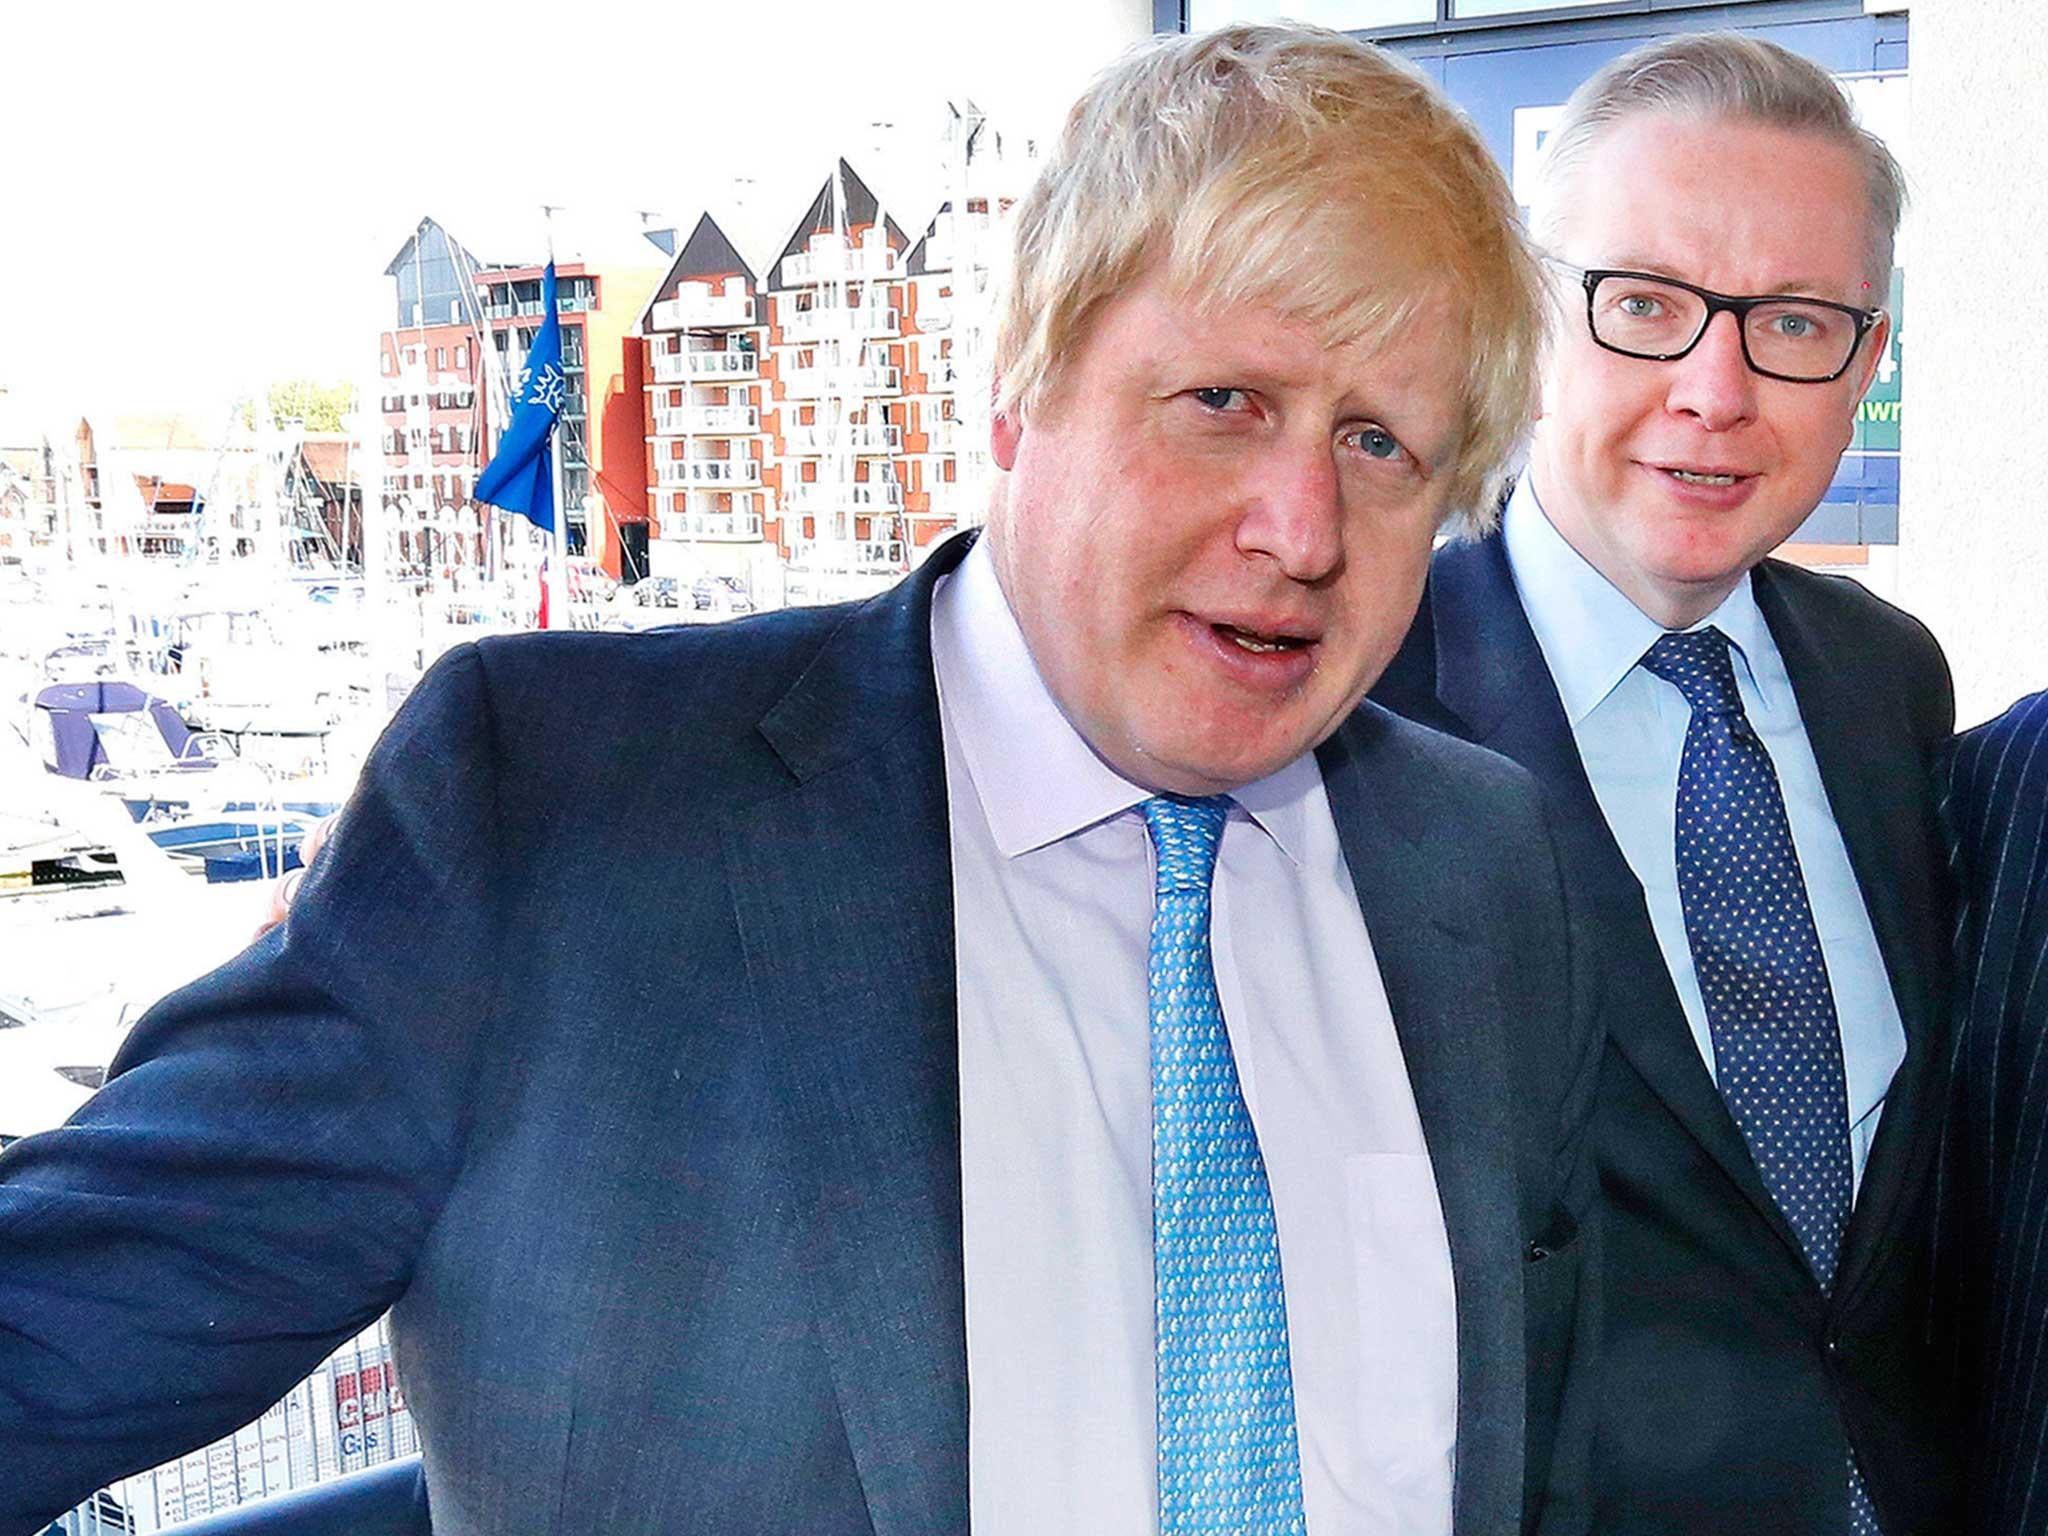 Boris Johnson and Michael Gove during a visit to Neptune Marina in Ipswich